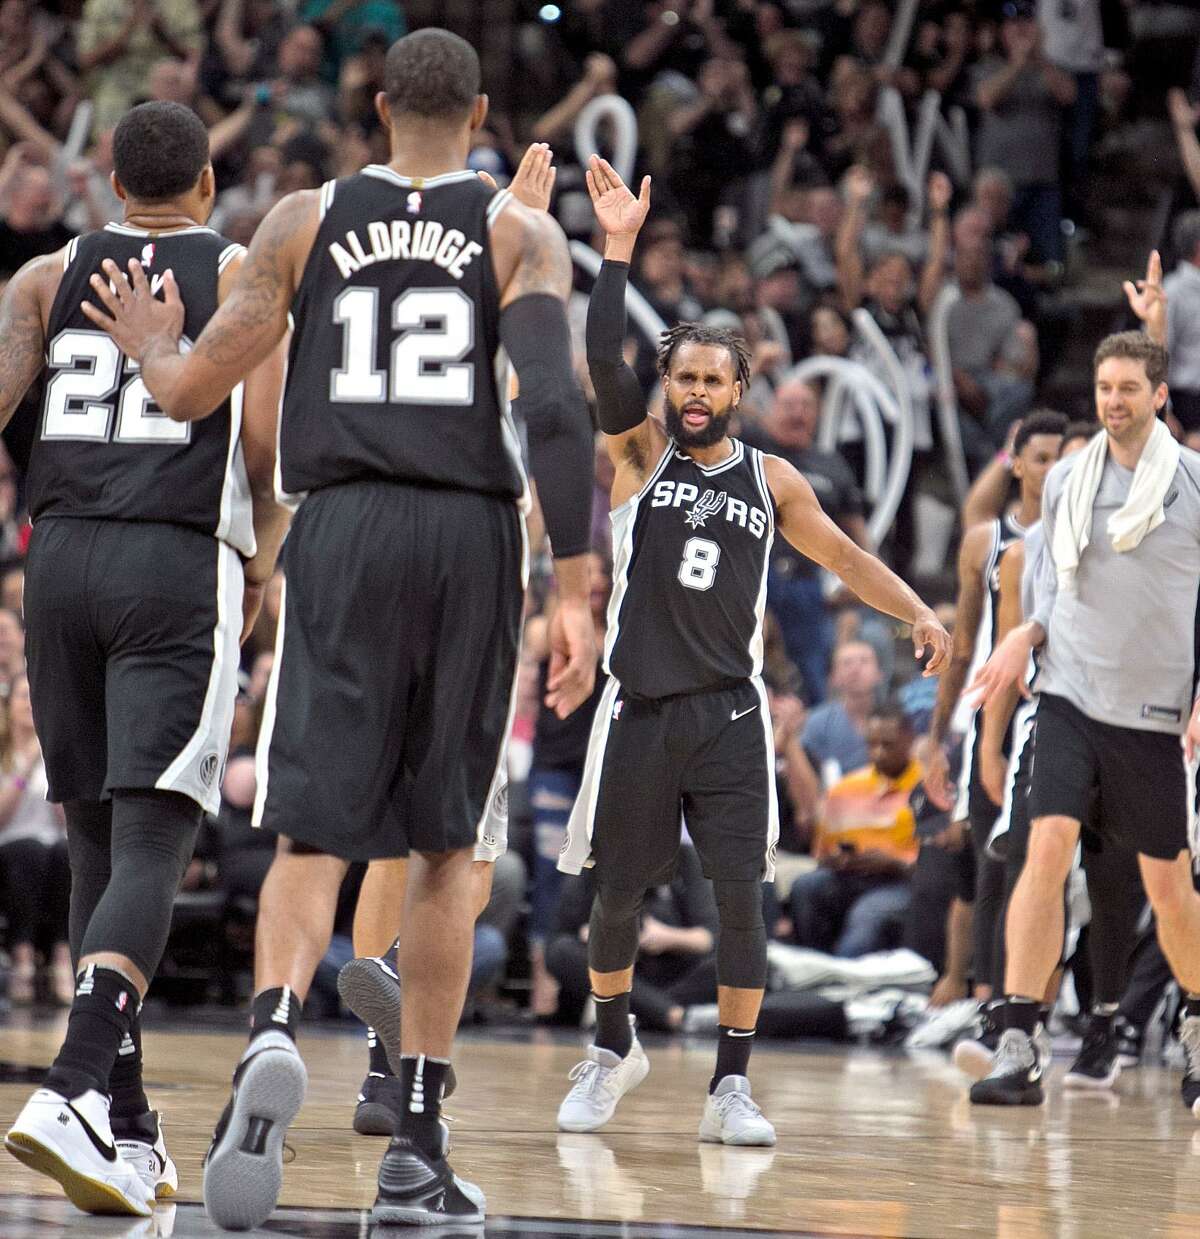 SAN ANTONIO,TX - APRIL 1 : Patty Mills #8 of the San Antonio Spurs celebrats with teammates after hitting a three at AT&T Center on April 1 , 2018 in San Antonio, Texas. NOTE TO USER: User expressly acknowledges and agrees that , by downloading and or using this photograph, User is consenting to the terms and conditions of the Getty Images License Agreement. (Photo by Ronald Cortes/Getty Images)